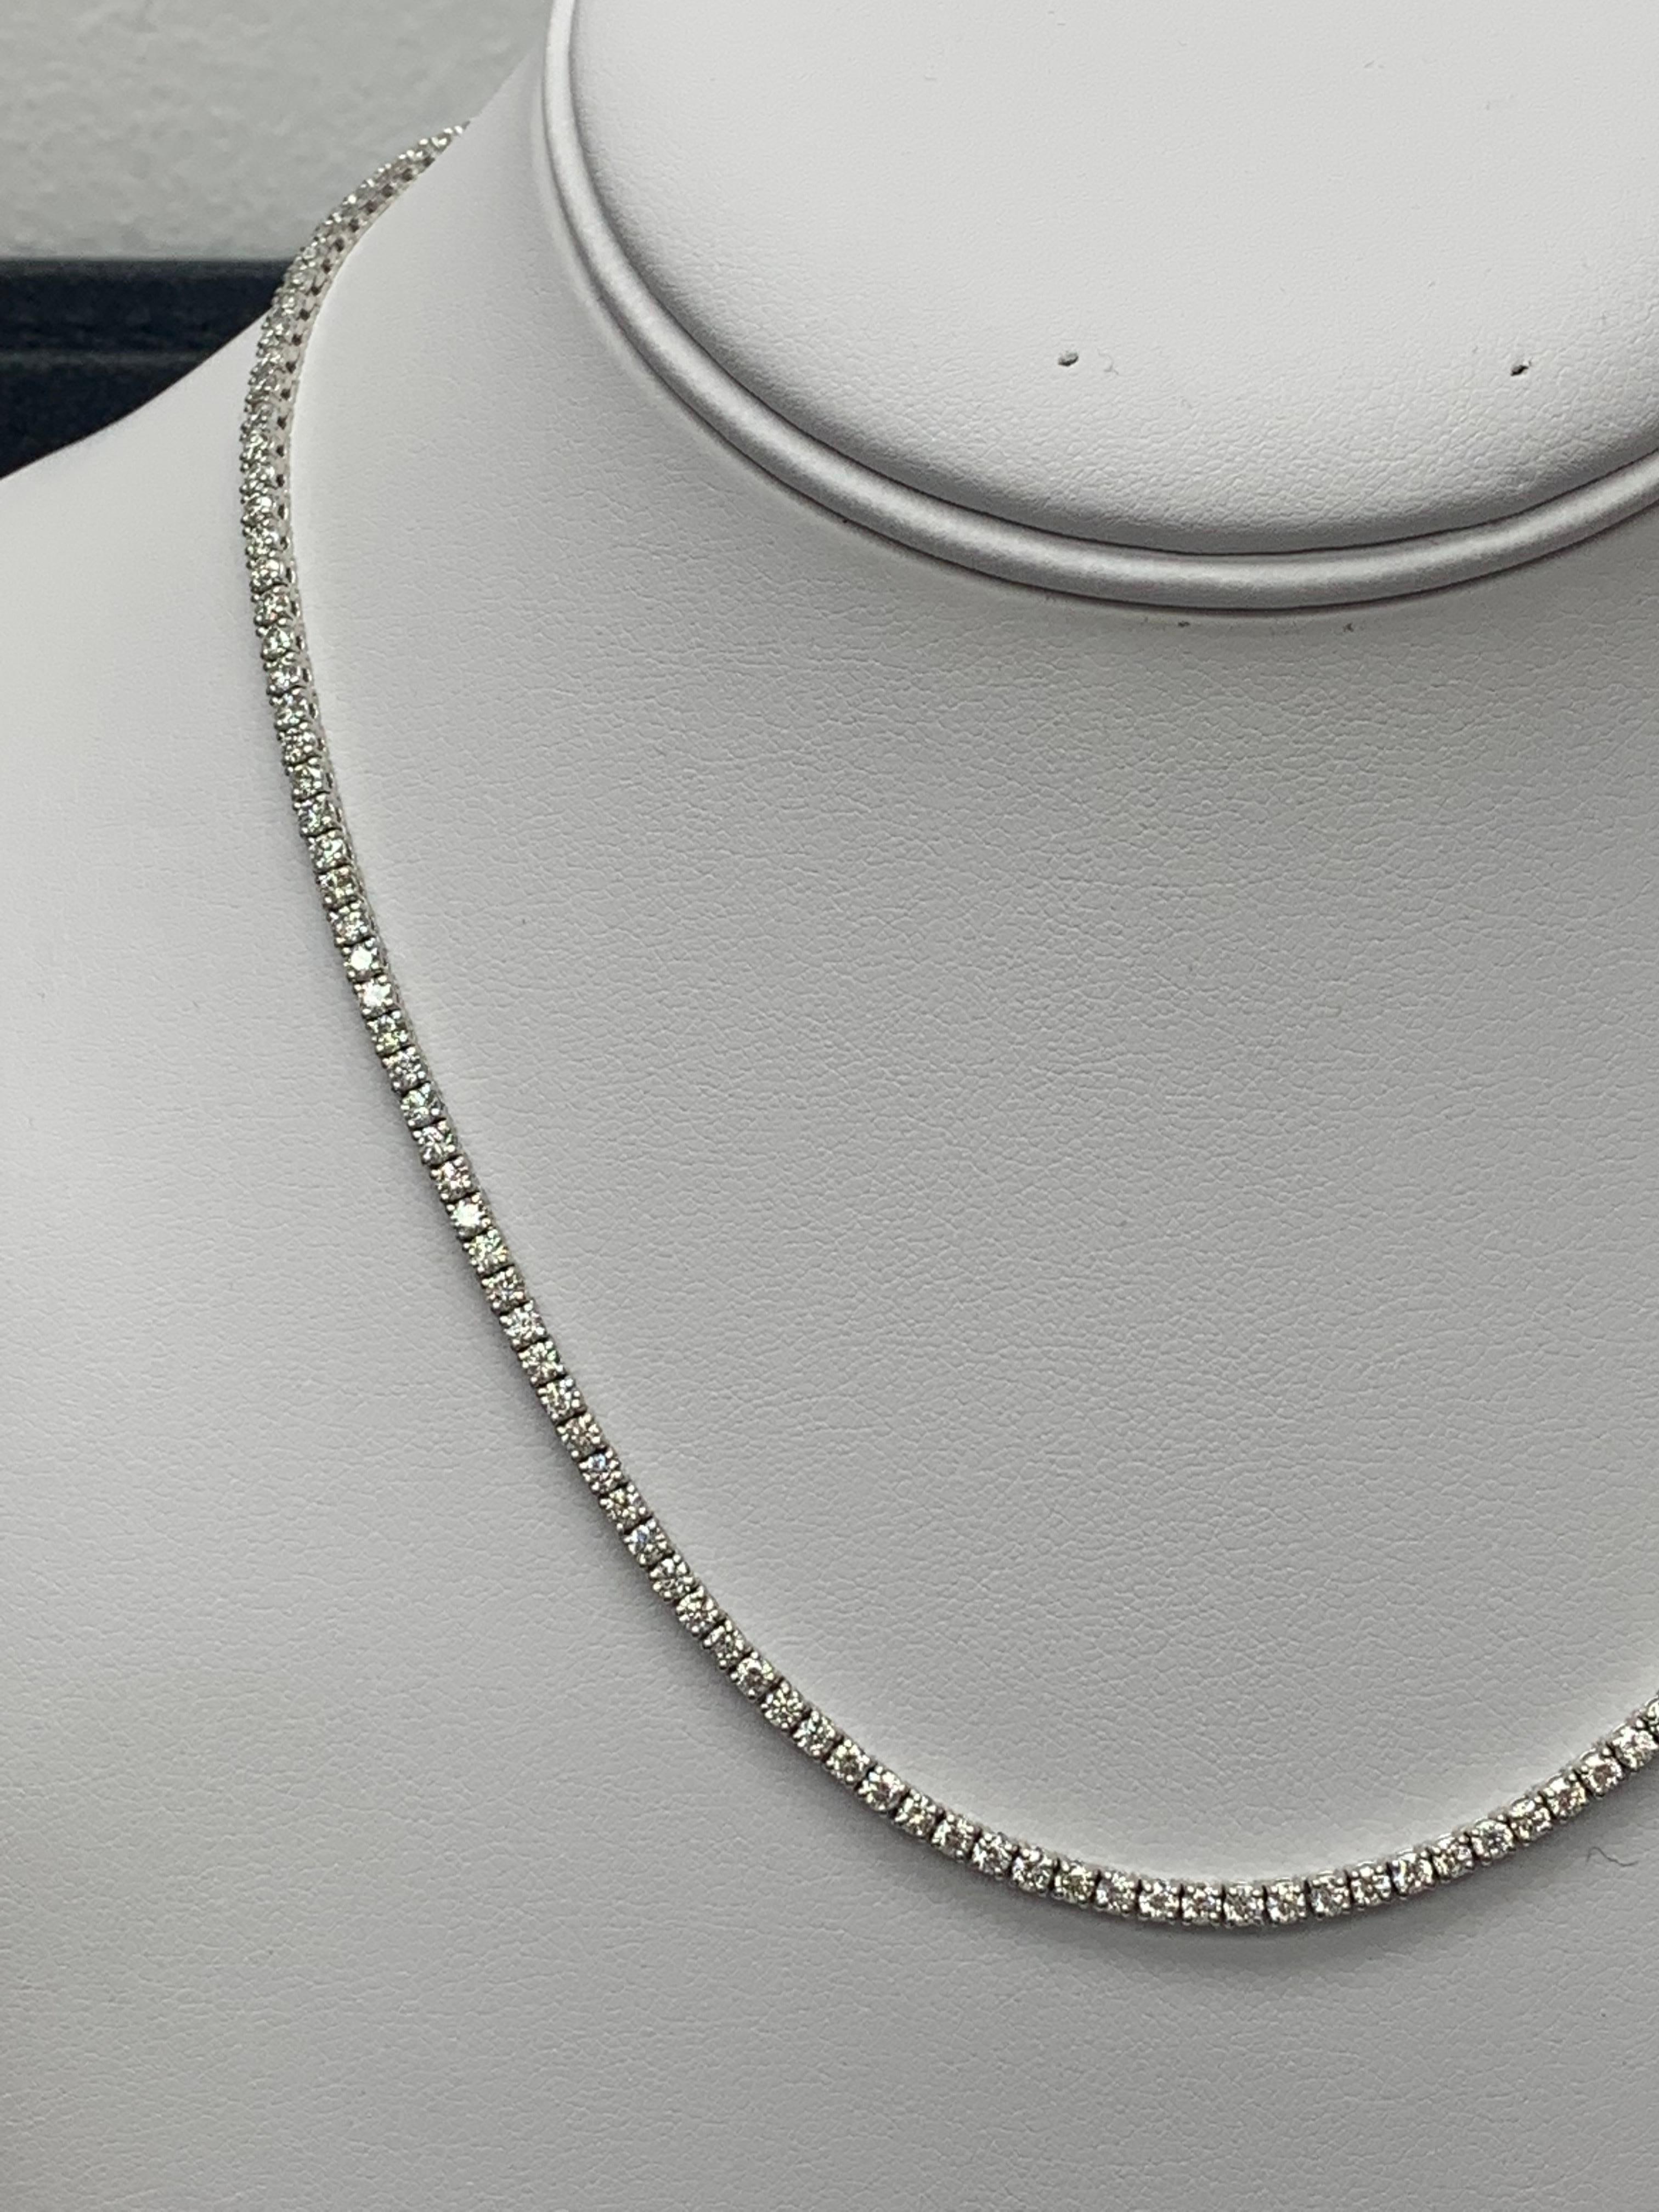 Modern 11.31 Carat Diamond Tennis Necklace in 14K White Gold For Sale